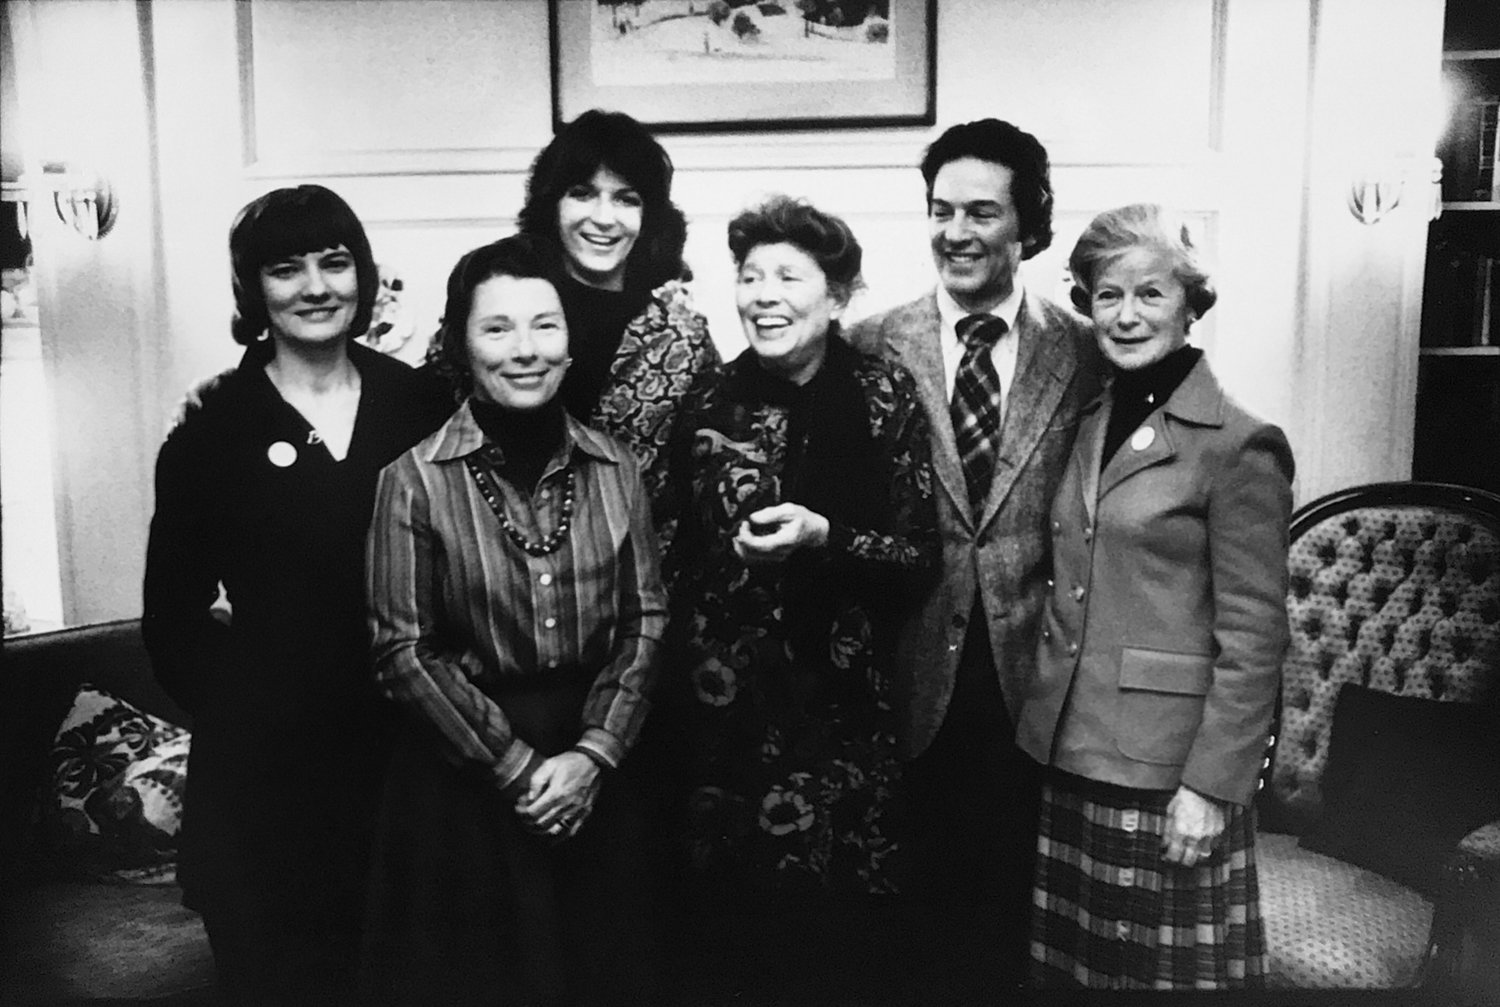 At the Riverdale Mental Health Association’s 1977 annual meeting, the organization’s $1-A-Week committee members were introduced, including (from left) DiAnn Pierce, Terry Lane, Jill Babcock, Andrea Simon, RMHA president Zachary Rosenfield, and Sylvia Goldberg.